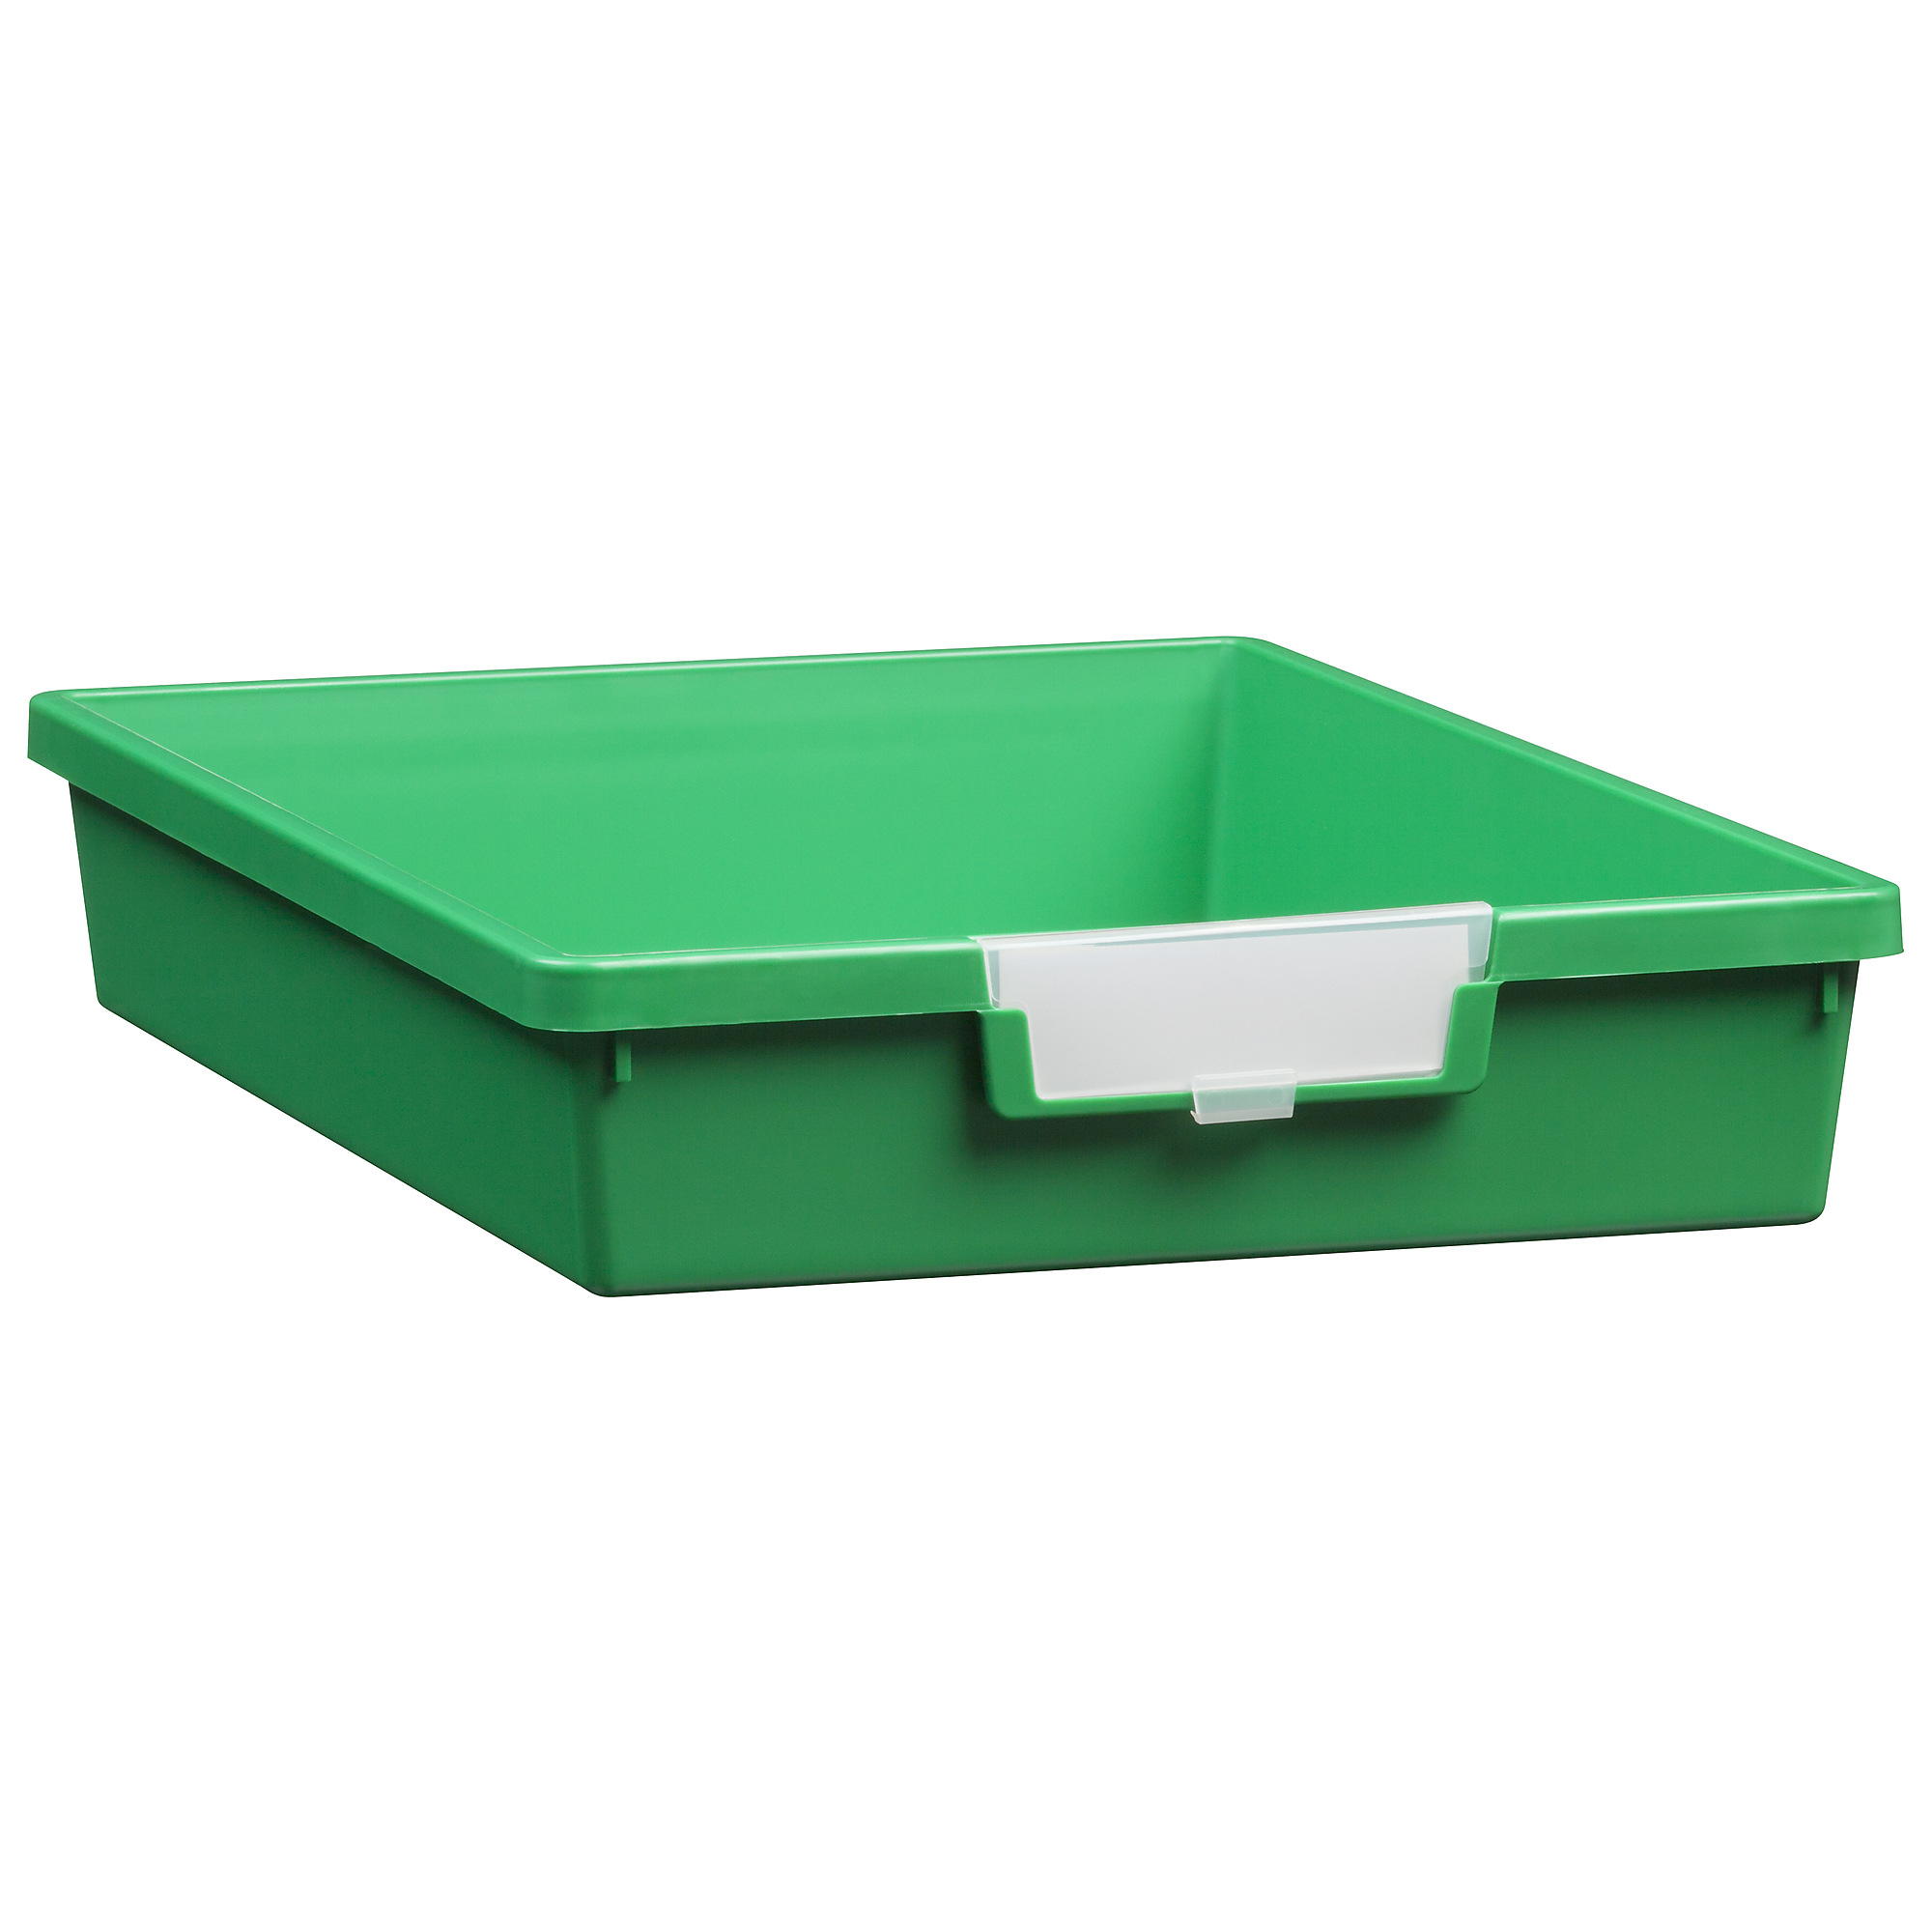 Certwood StorWerks, Slim Line 3Inch Tray in Primary Green-1PK, Included (qty.) 1 Height 3 in, Model CE1950PG1